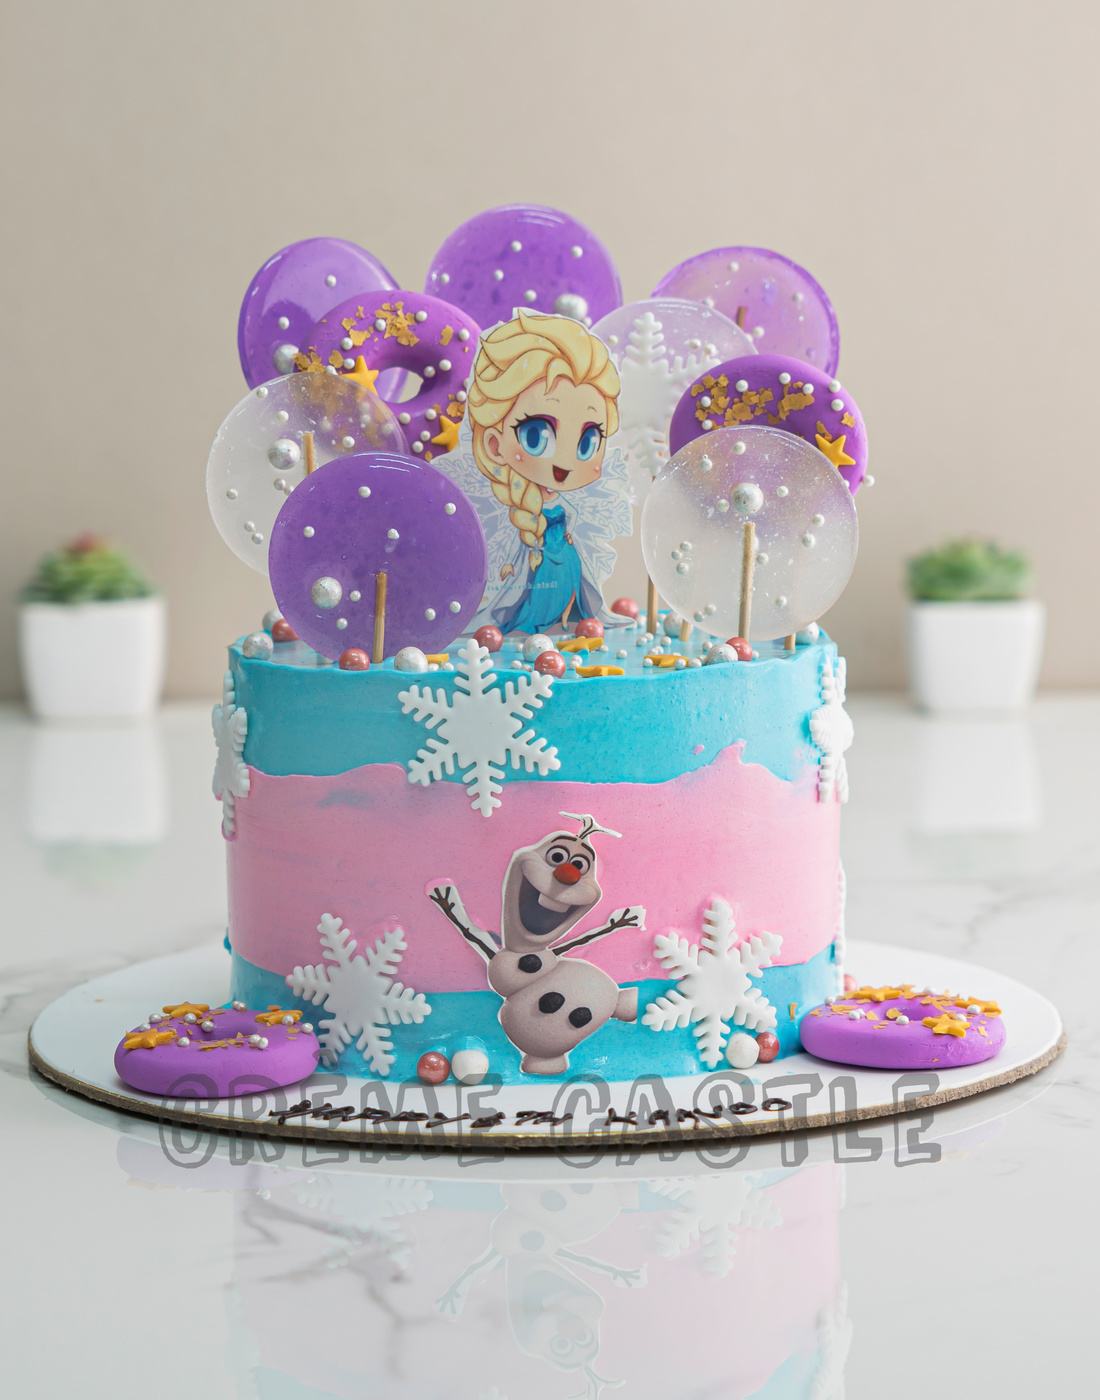 Ultimate Compilation of 999+ Stunning Frozen Cake Images – Full 4K Collection